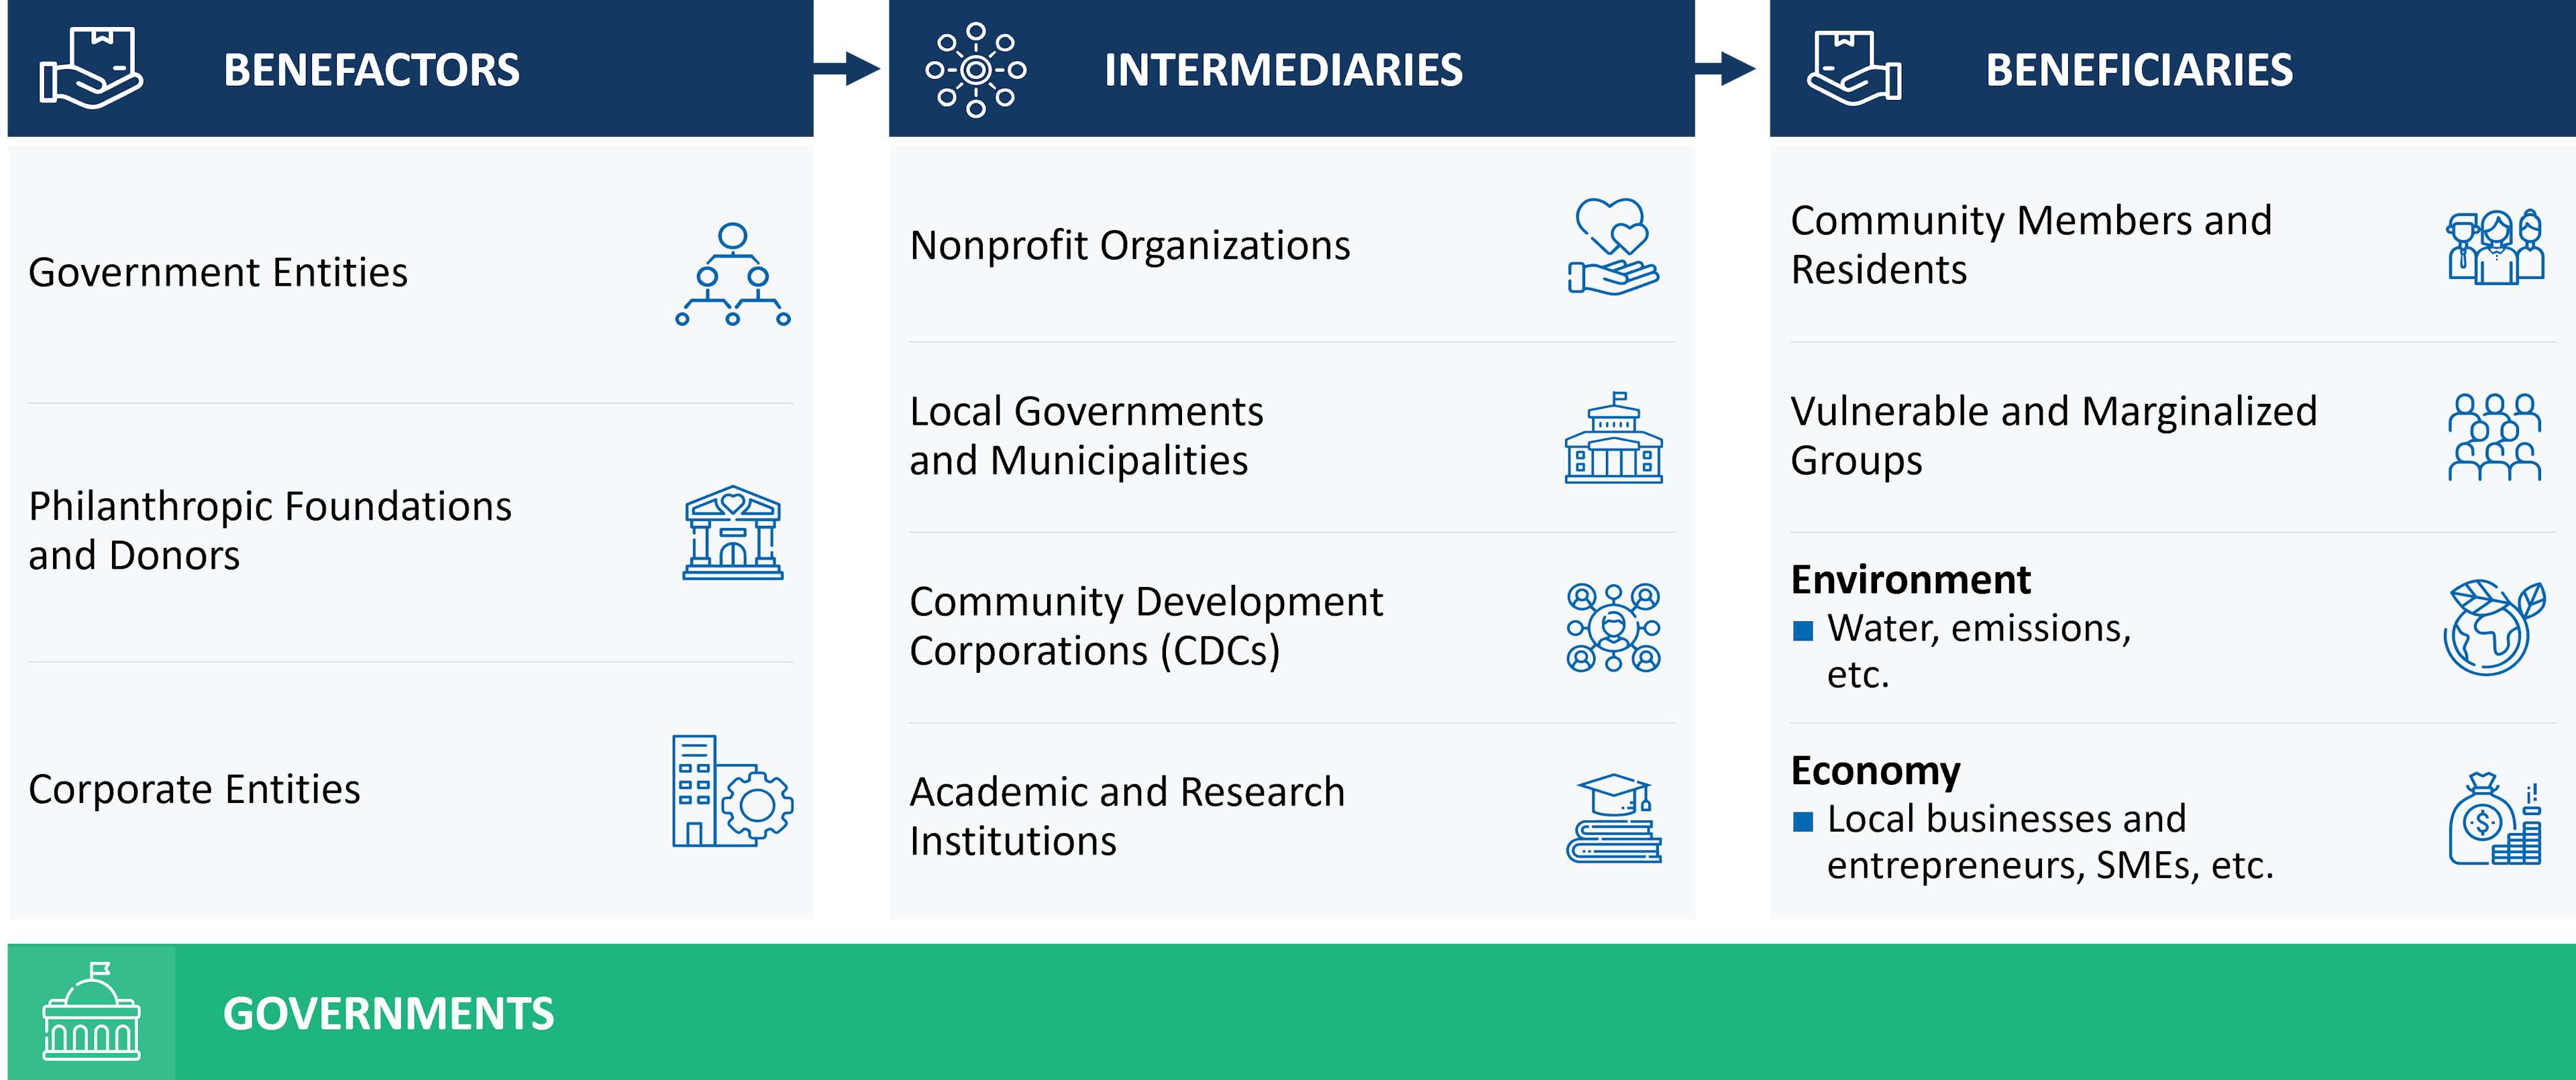 FIGURE 8: COMMUNITY AND SOCIAL RESPONSIBILITY STAKEHOLDERS